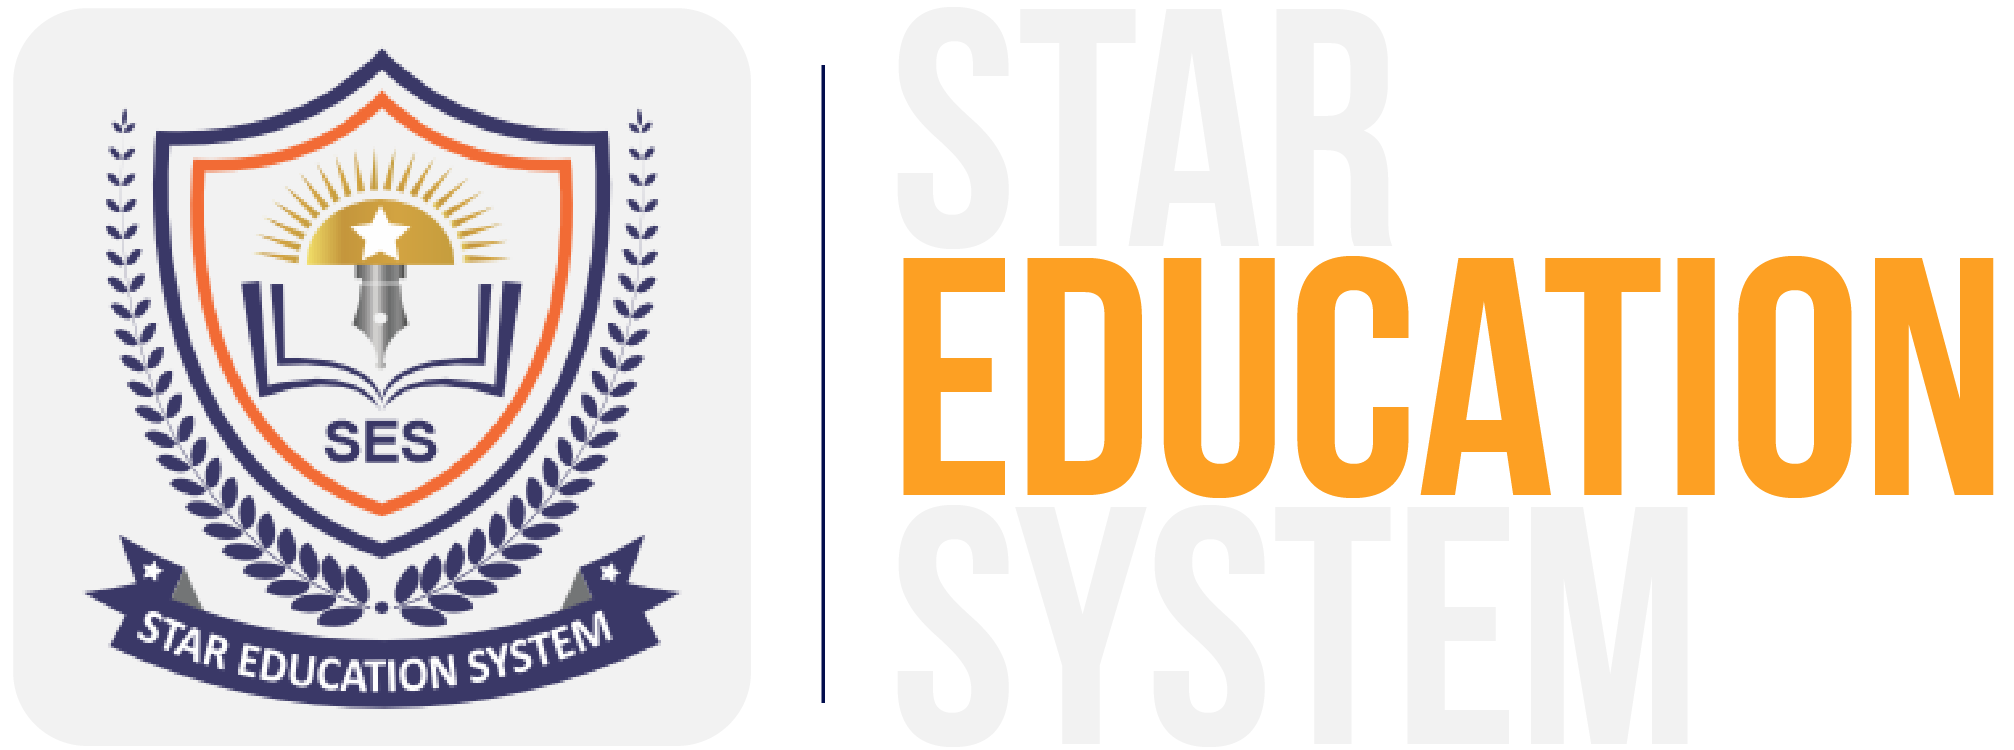 Star Education System - A Door to the Bright Future - SES Project